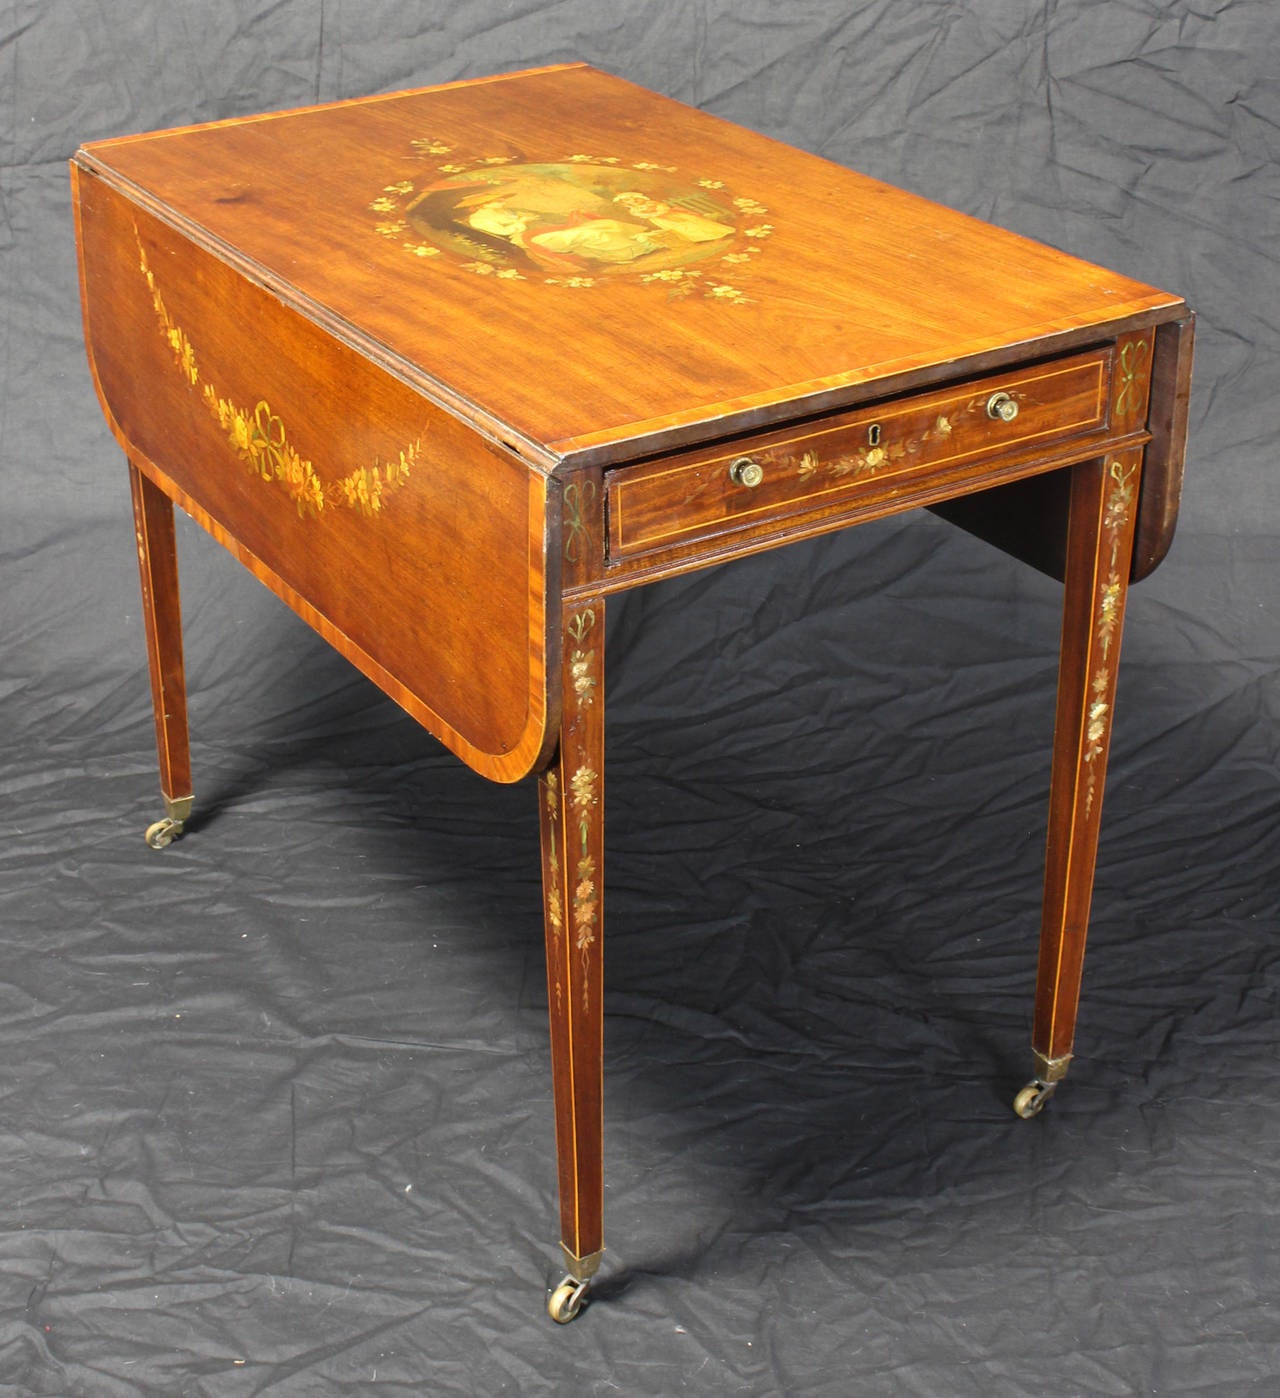 An elegant early 19th century mahogany pembroke table with extensive polychrome decoration on top, drawer and supports. The square tapering legs terminate in original brass casters.